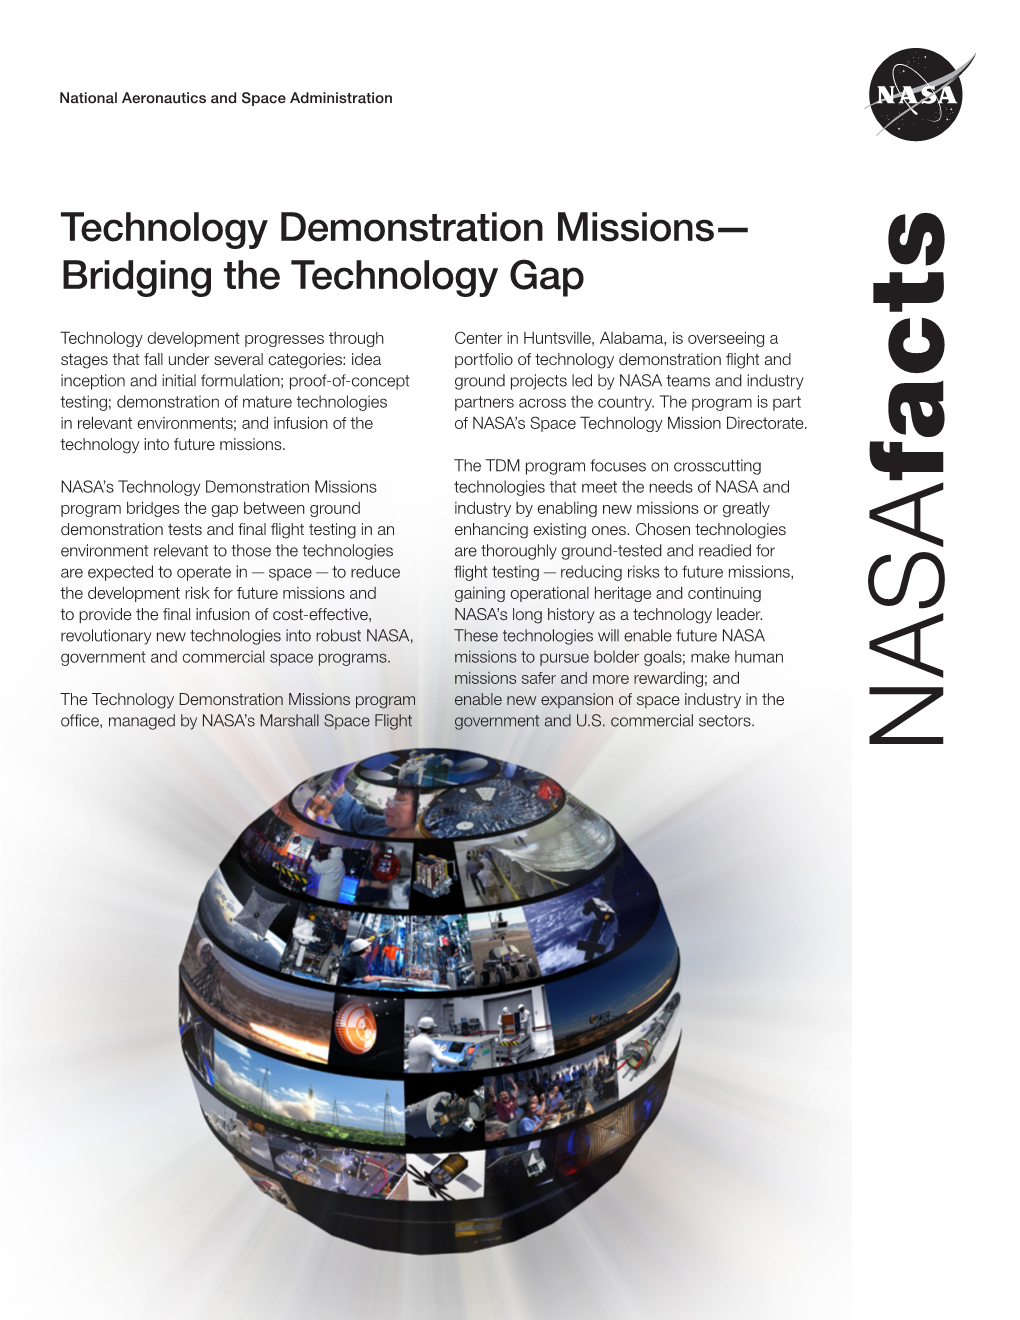 Technology Demonstration Missions— Bridging the Technology Gap